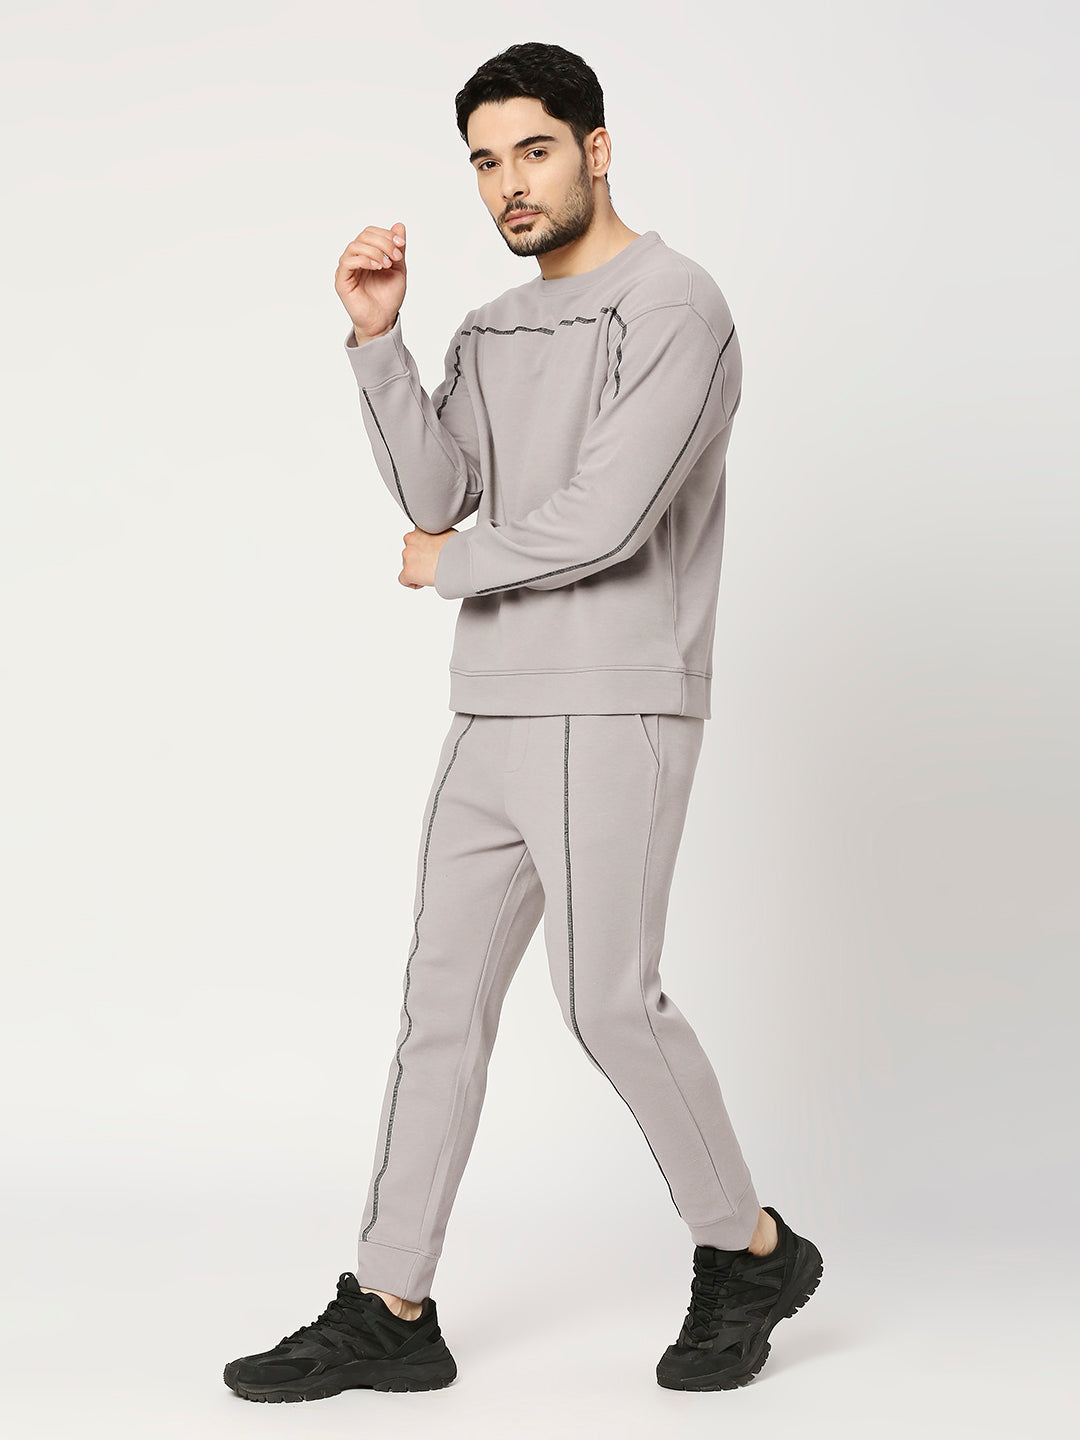 Buy Blamblack Men's Solid Full sleeves Sweat with Pants Co-Ord Set with Contrast Stitch detail.